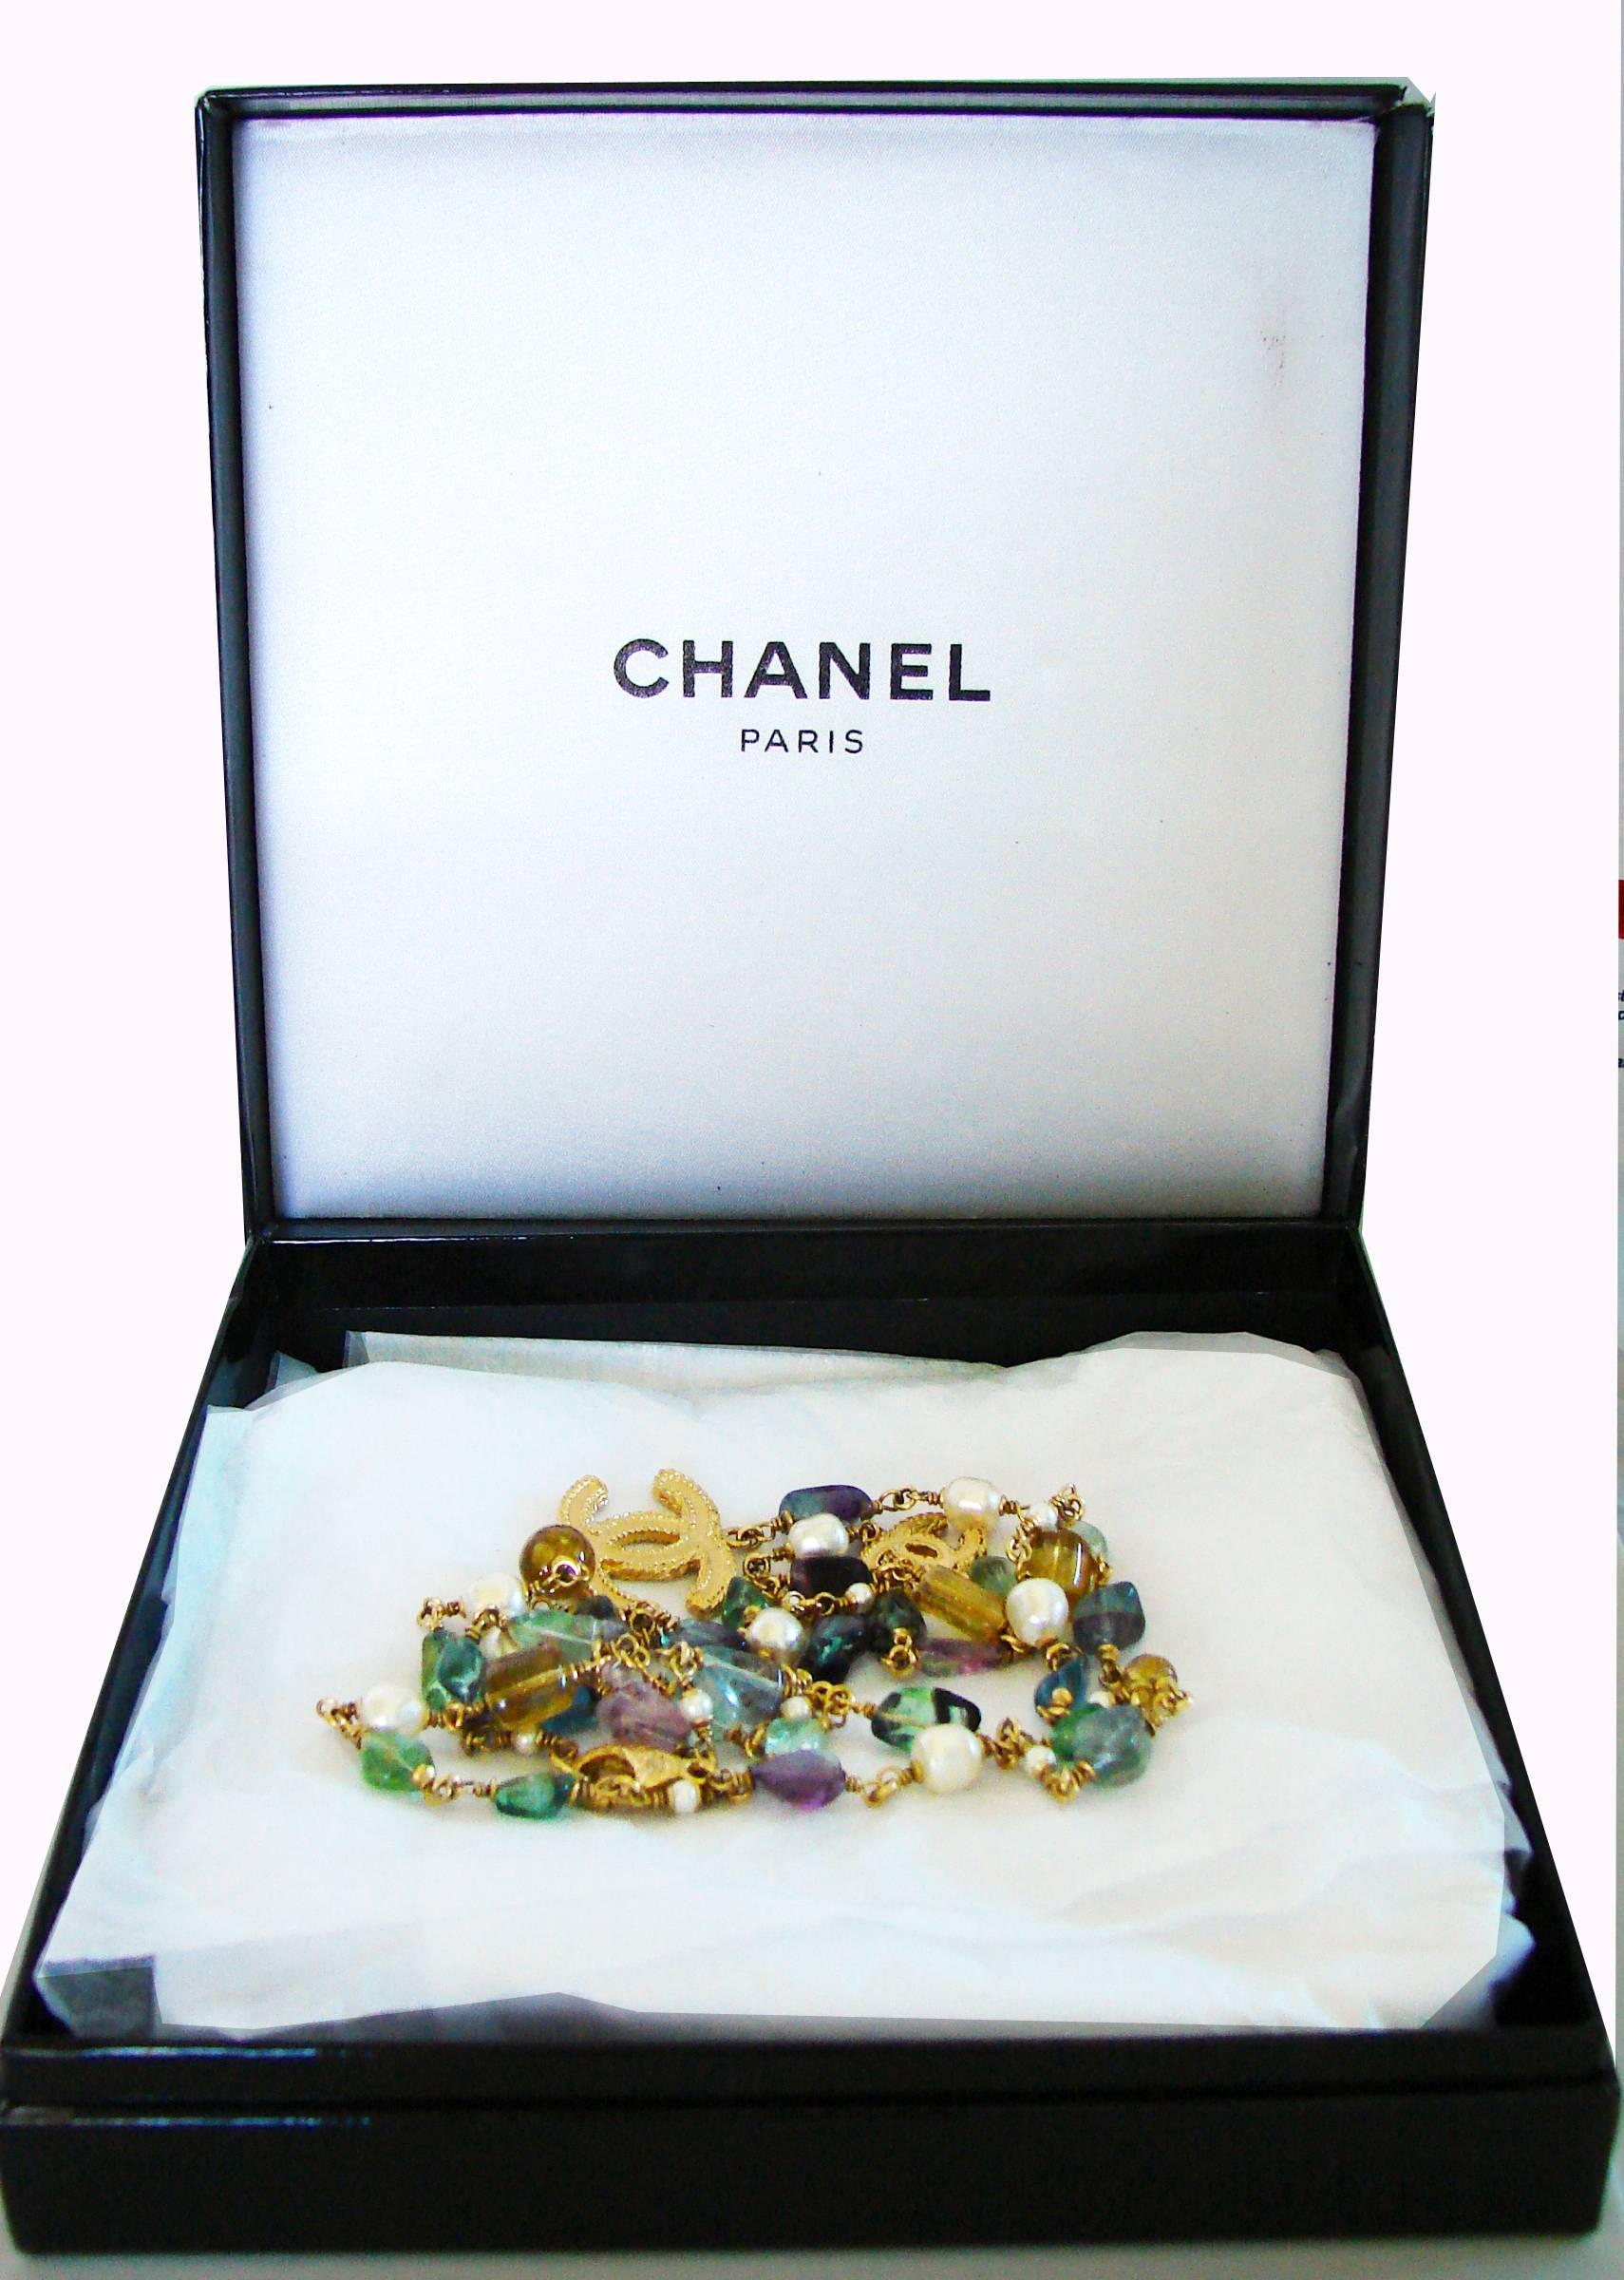 A lovely necklace from Chanel, from their 11A collection.  Features colorful gemstones and the iconic CC logo in gold.  Fastens with a lobster claw.  In excellent condition overall, we note one missing stone - hard to detect unless very closely